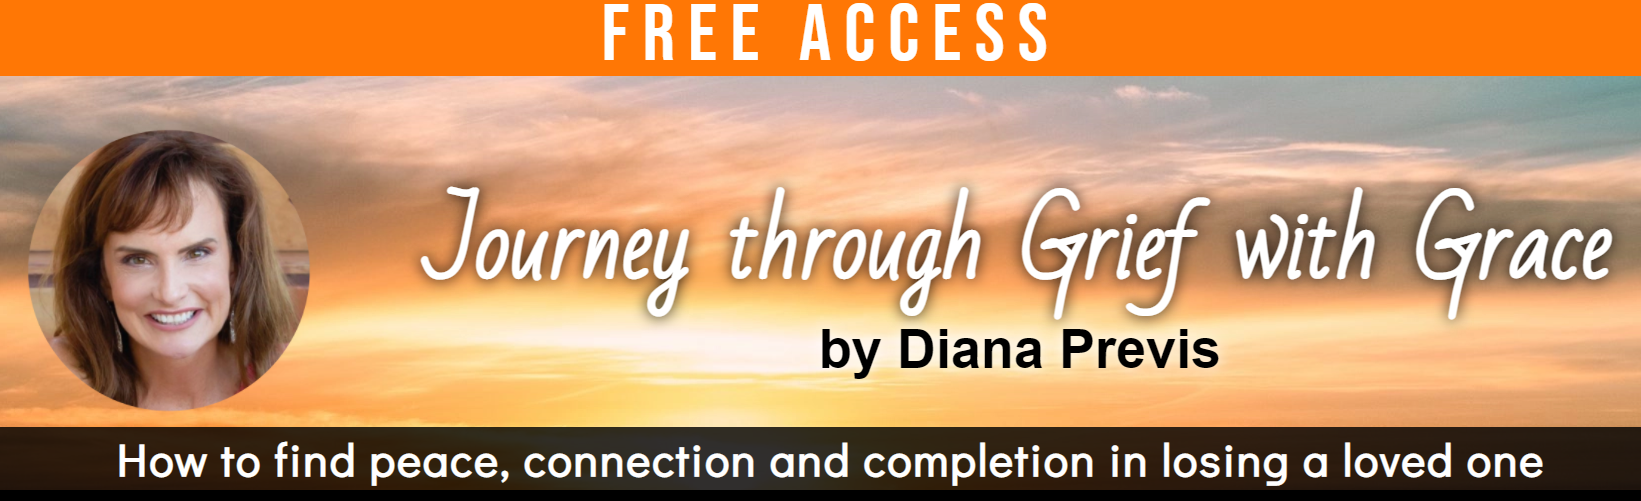 Journey Through Grief with Grace: How to Find Peace, Connection, and Completion in Losing a Loved One By Diana Previs